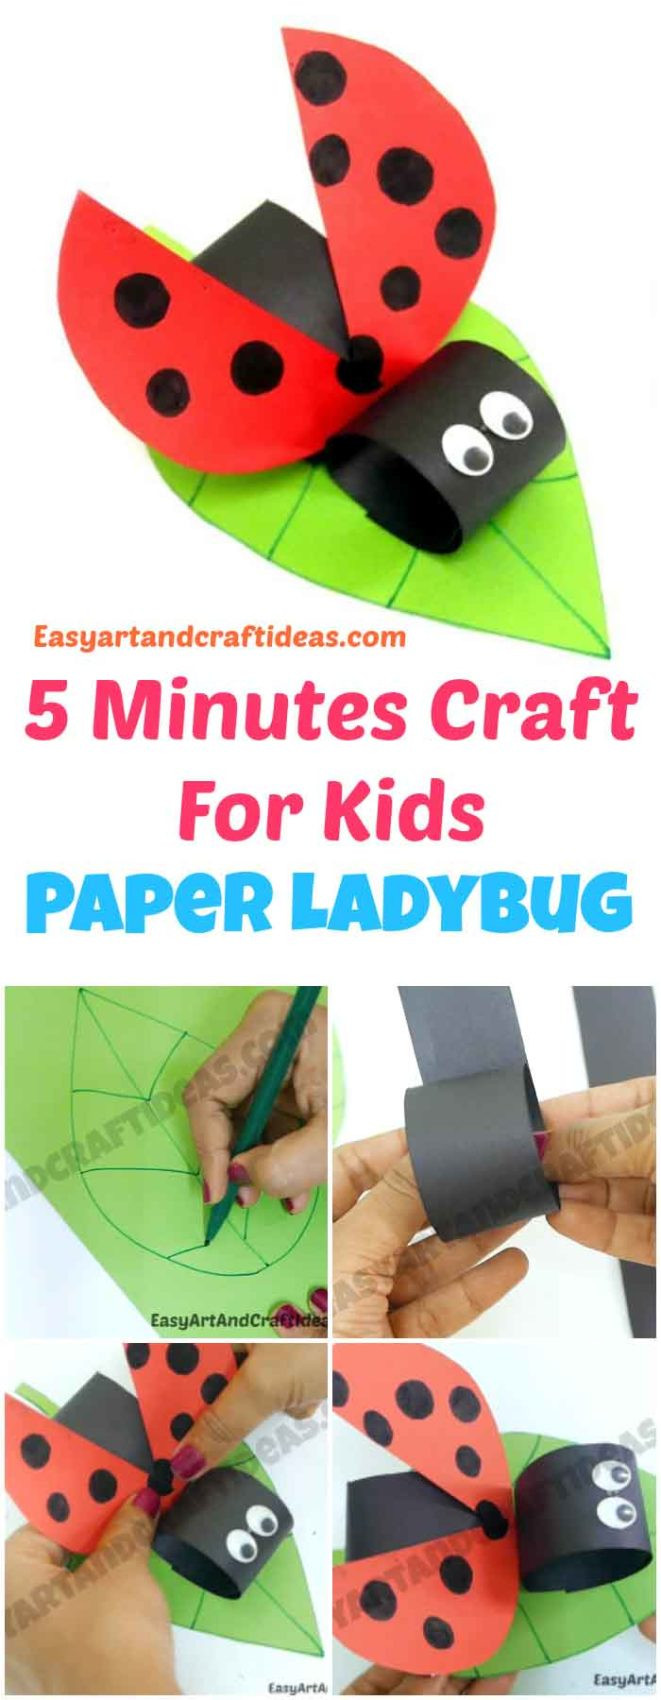 Simple Arts And Crafts For Toddlers
 DIY Paper LadyBug Easy Art And Craft Ideas For Kids